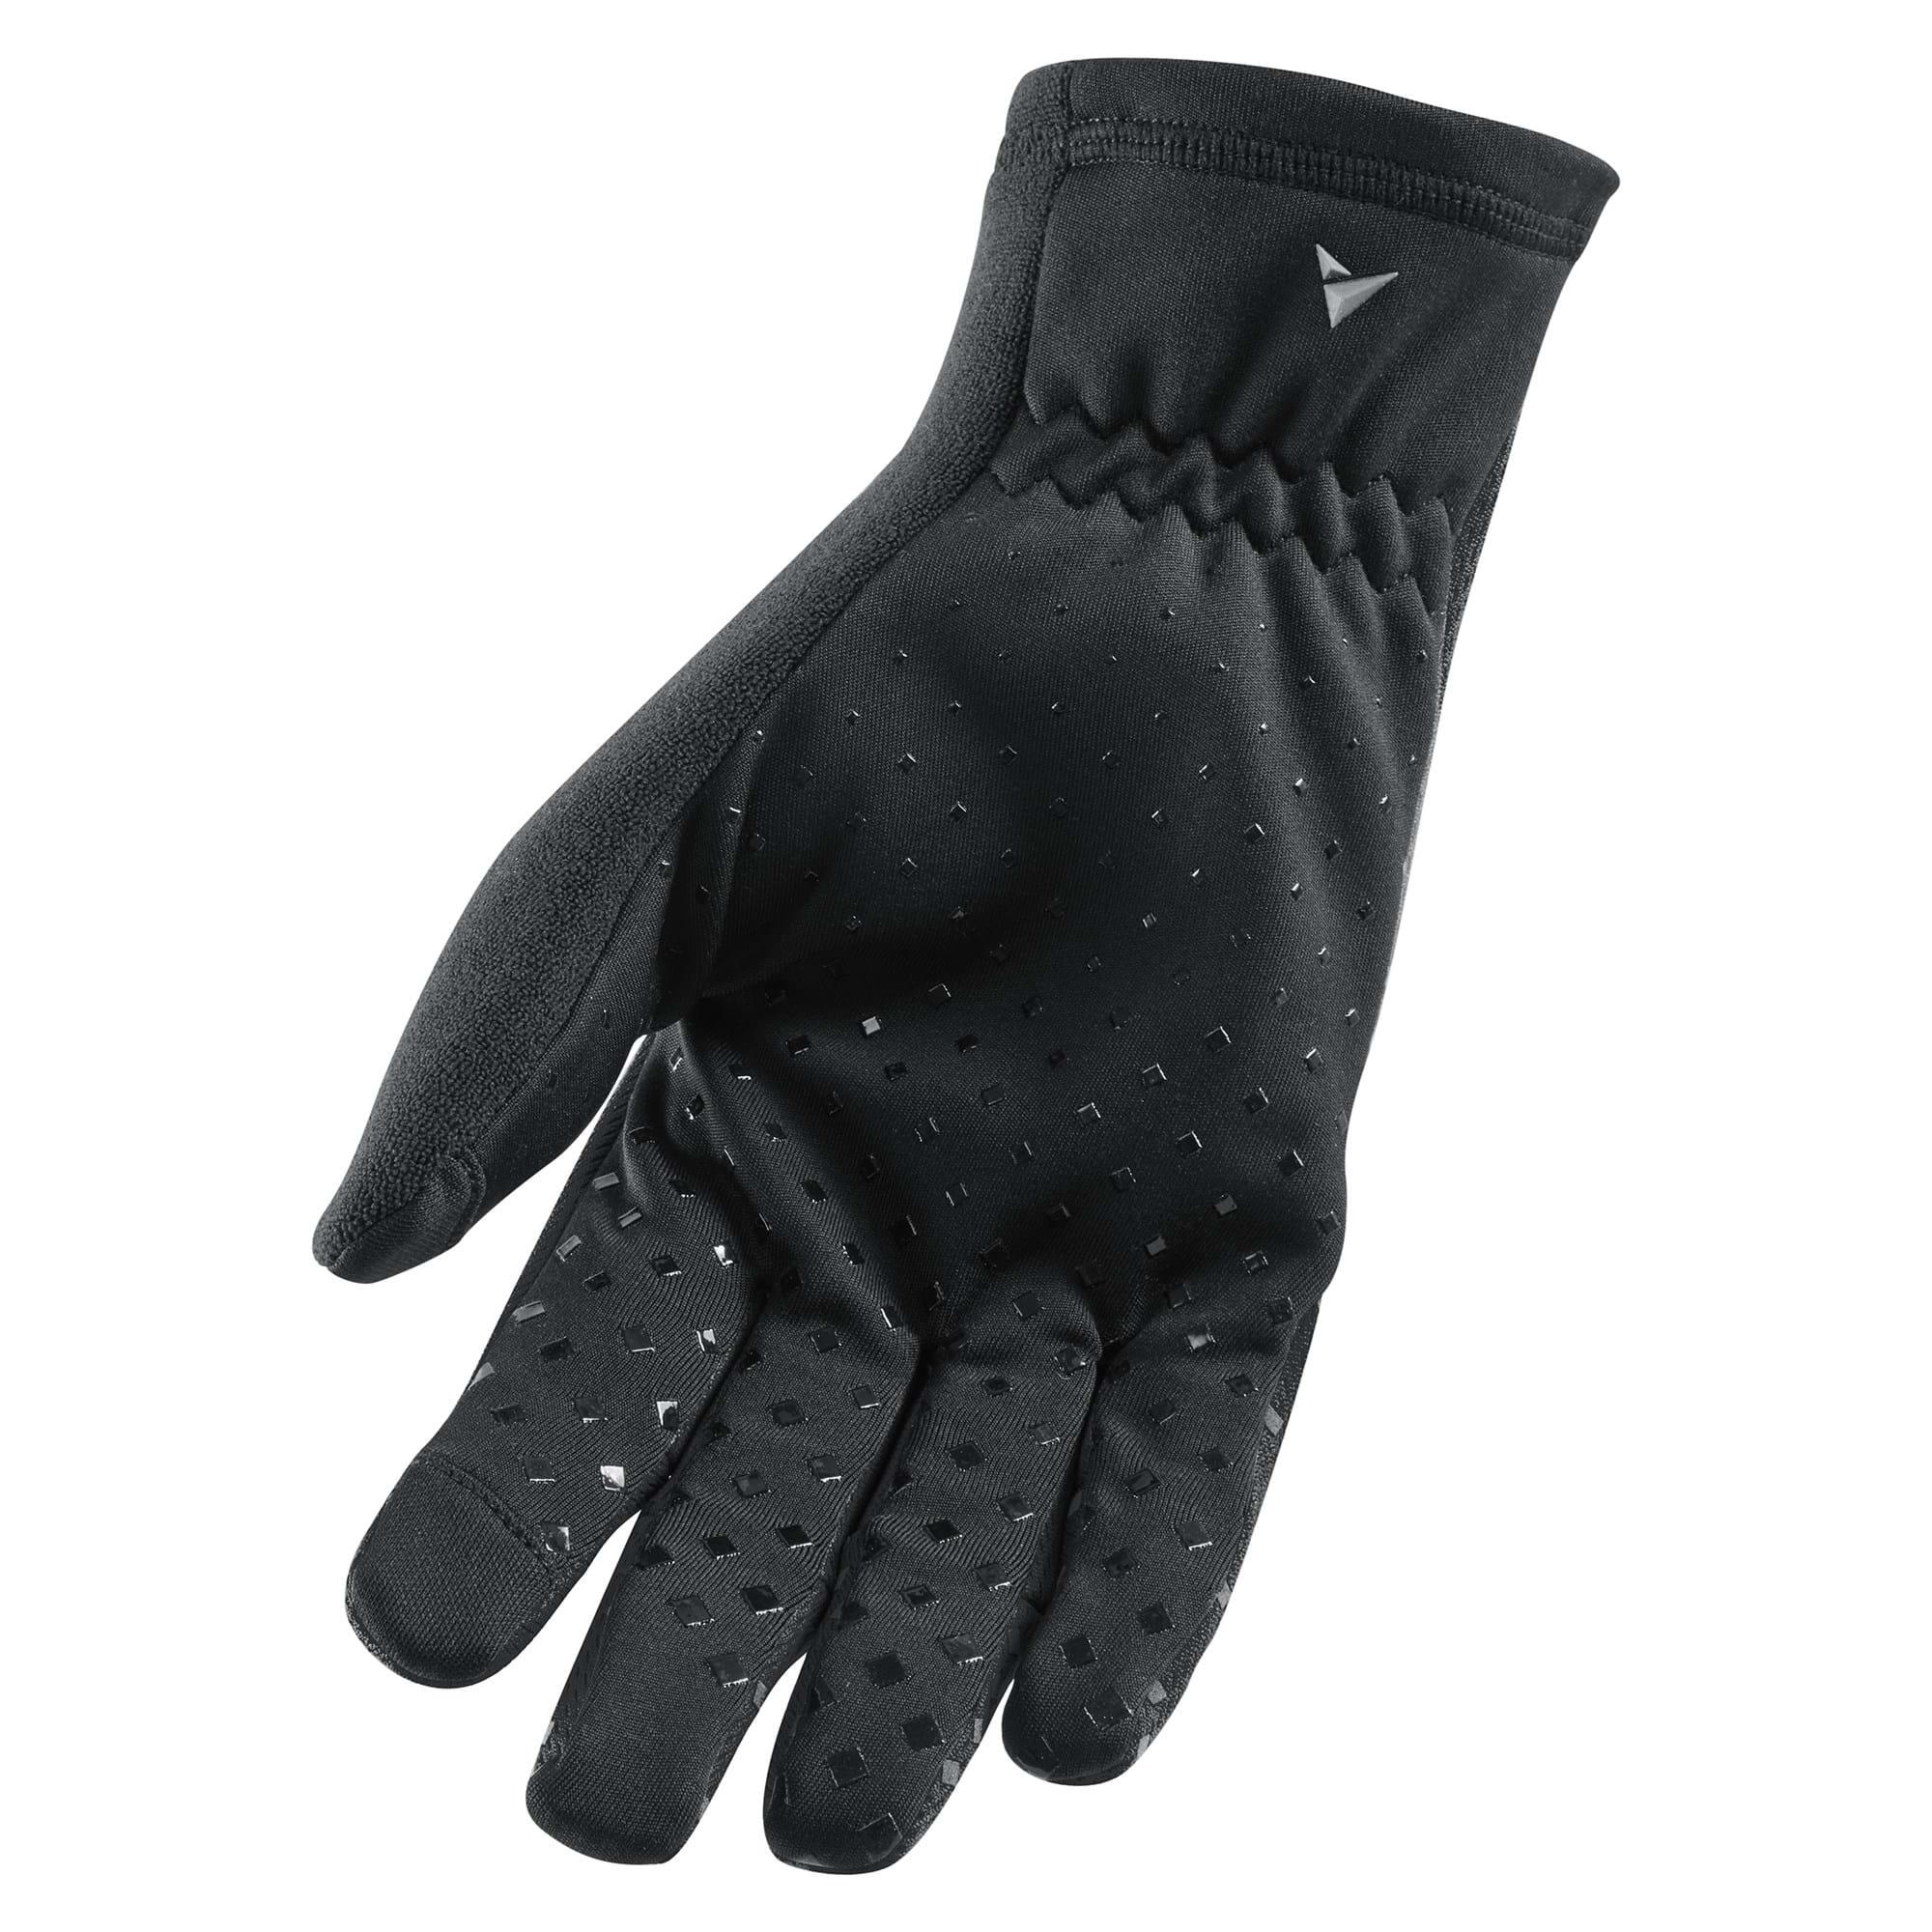 Nightvision Unisex Windproof Fleece Cycling Gloves 2/7